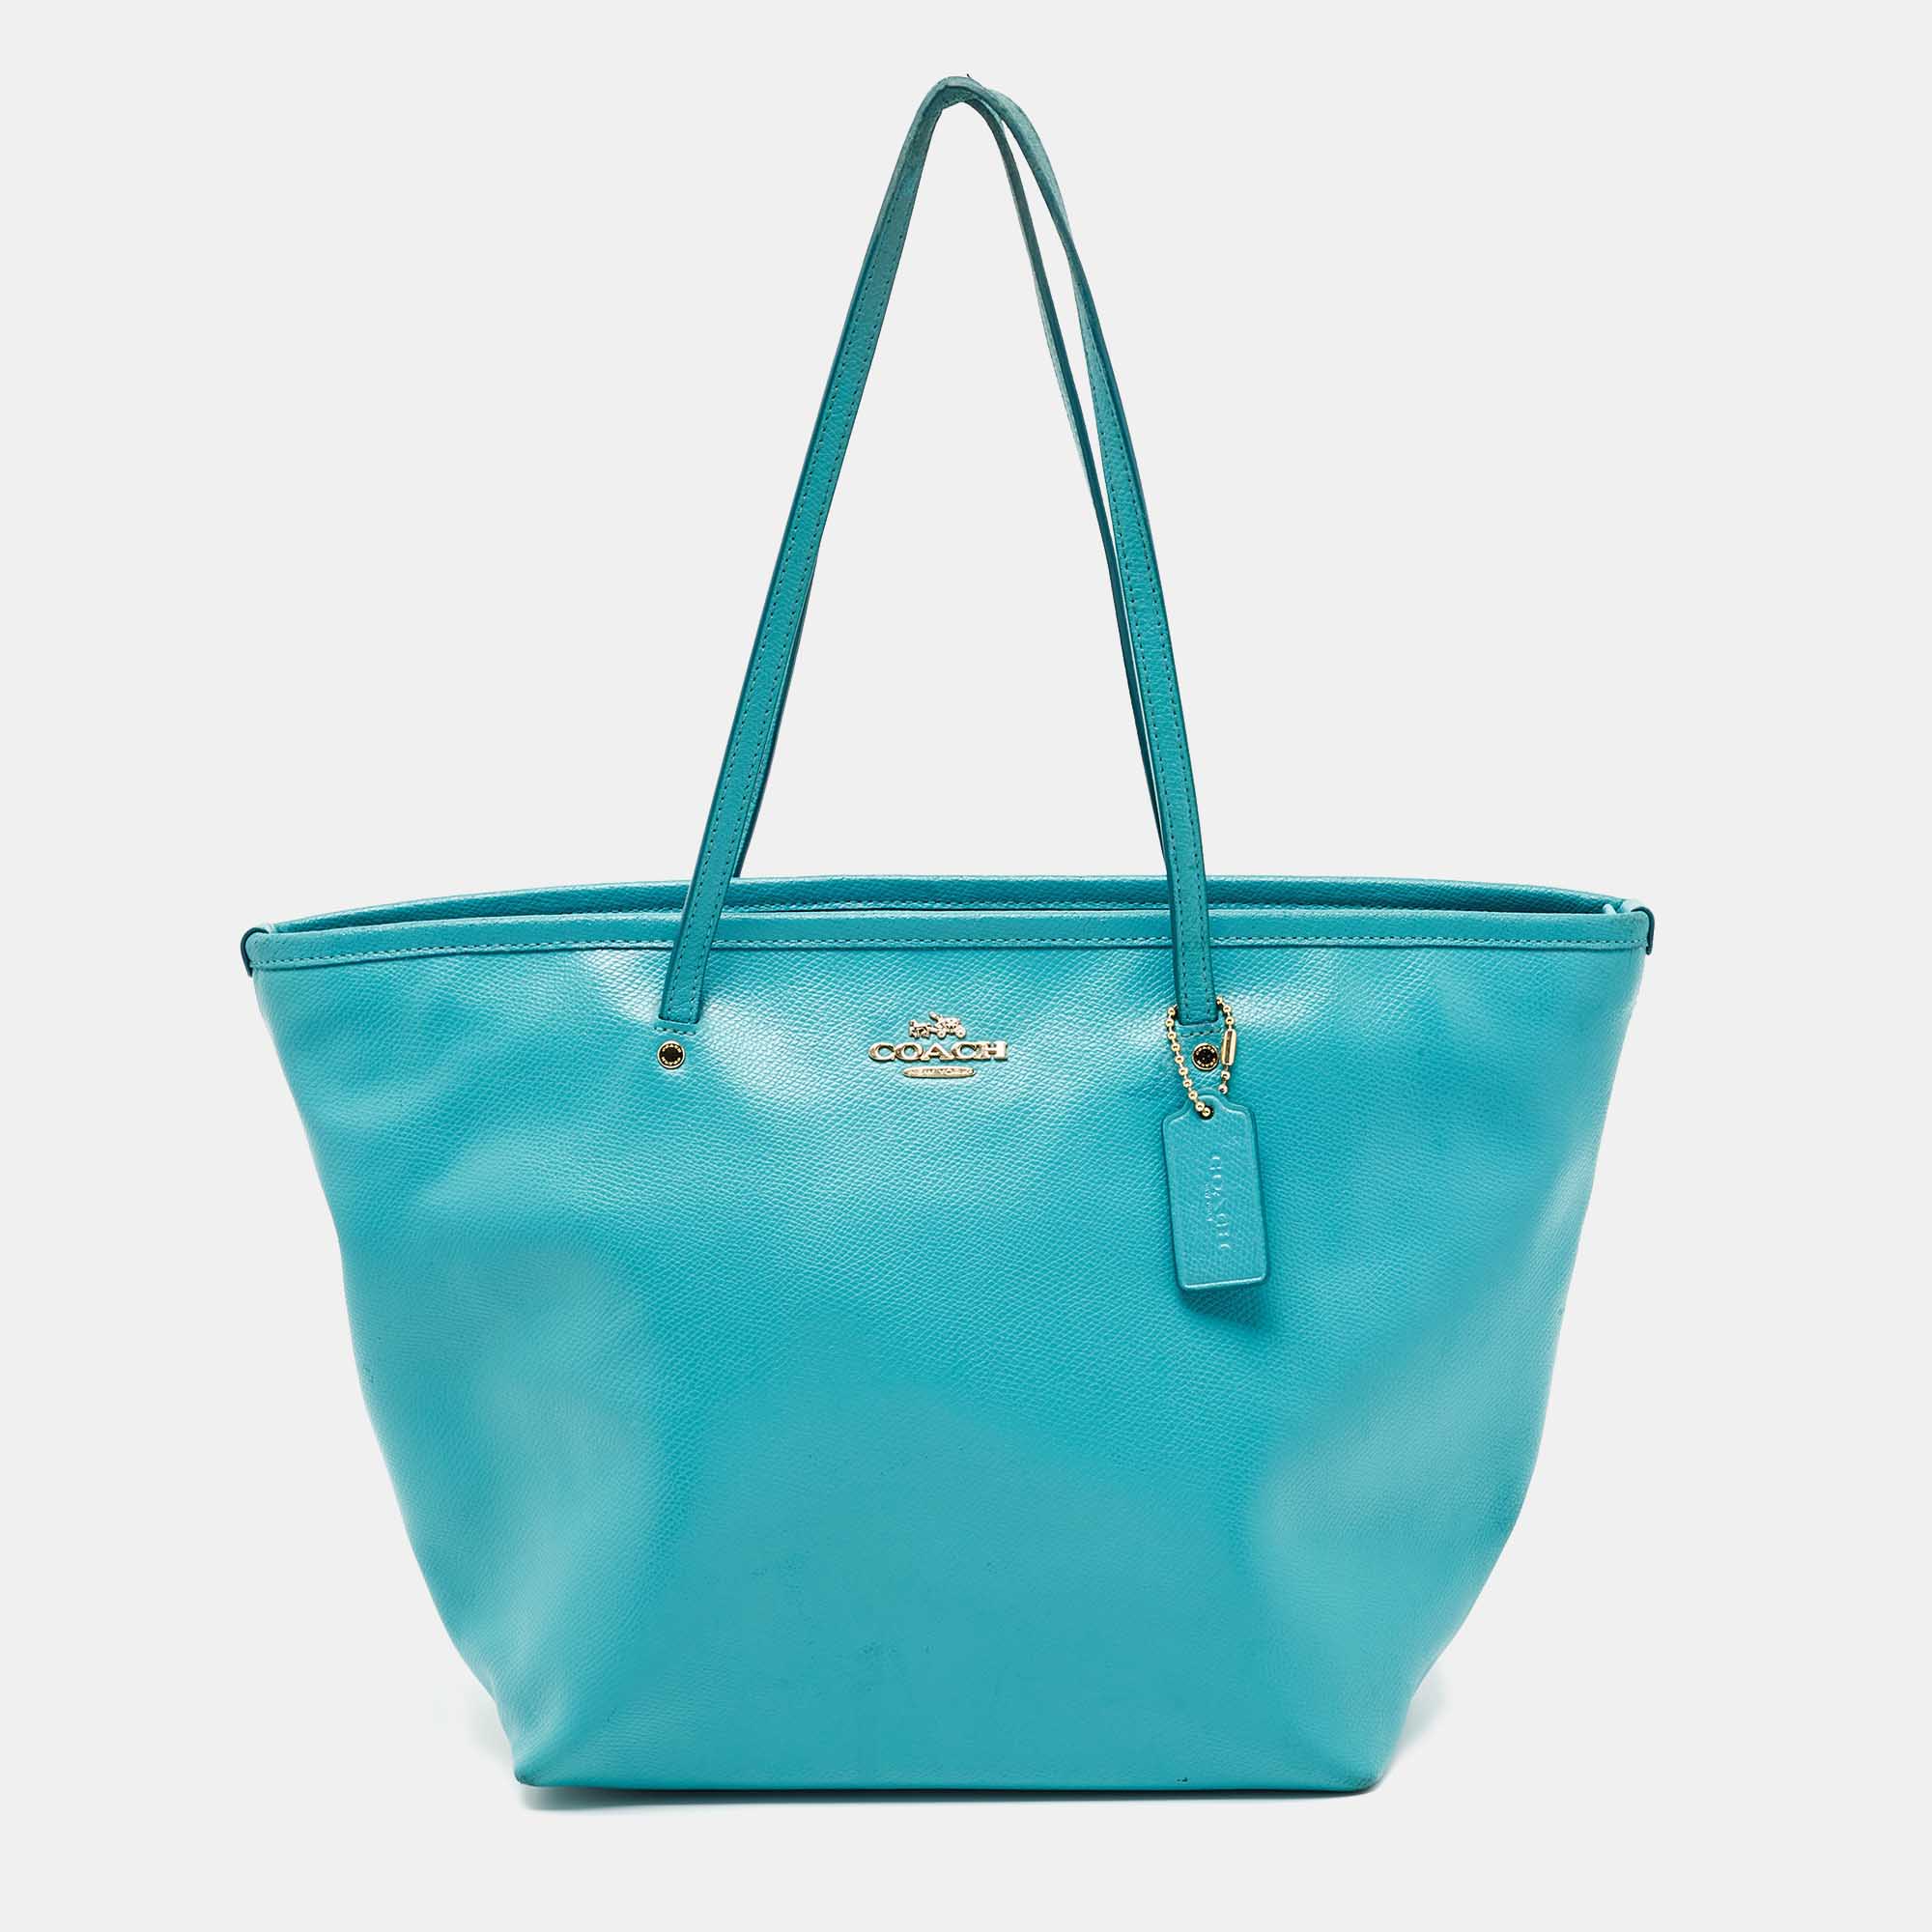 This Coach tote is an example of the brands fine designs that are skillfully crafted to project a classic charm. It is a functional creation with an elevating appeal.